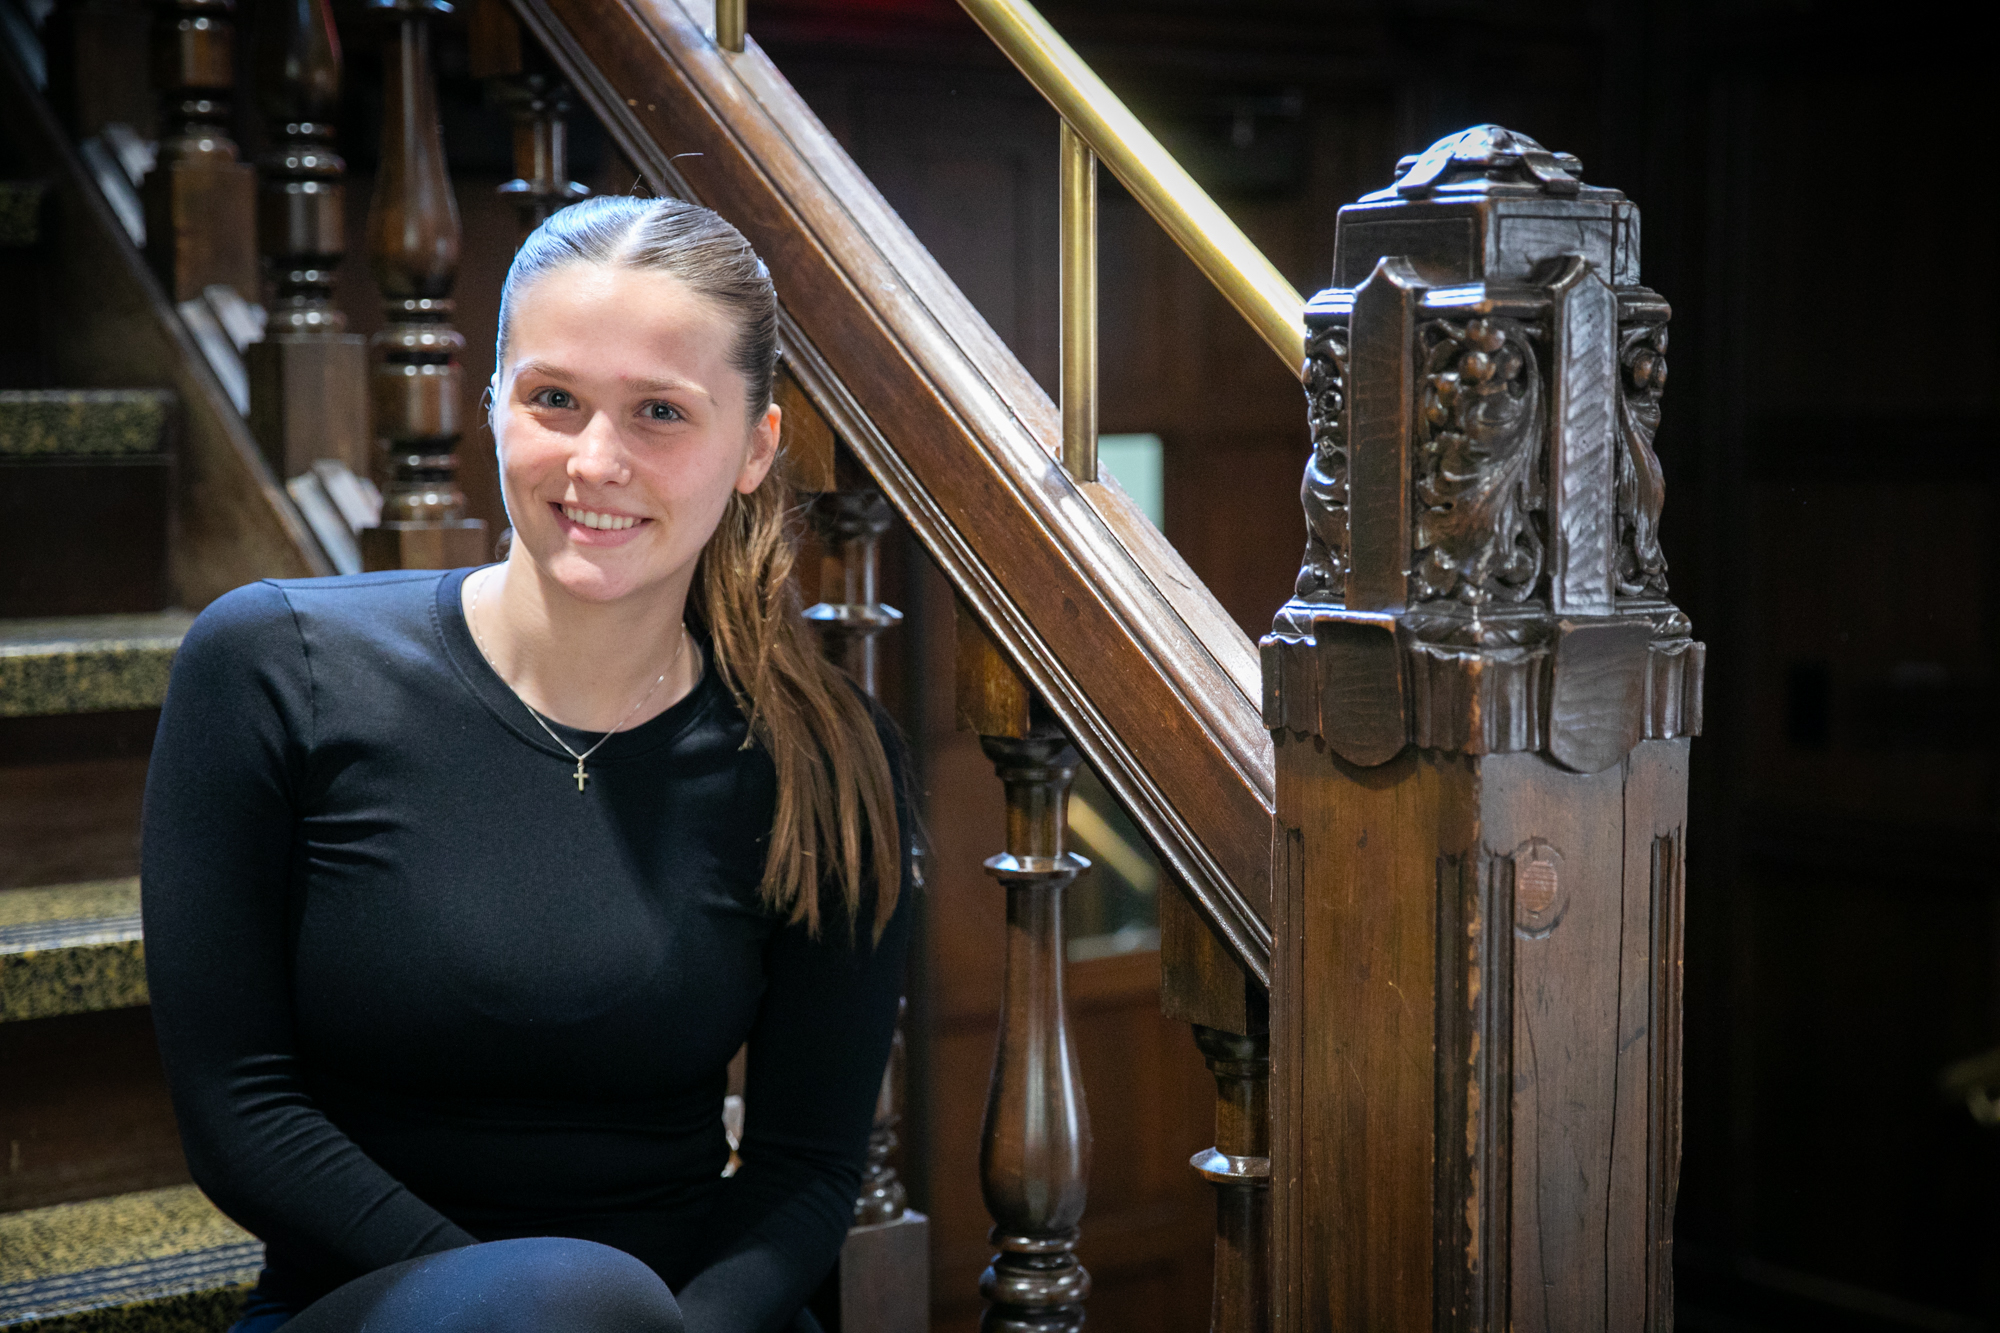 Lucy Rupertus sits on stairs next to an ornate wooden carved banister inside the ARCH building on Penn's campus.